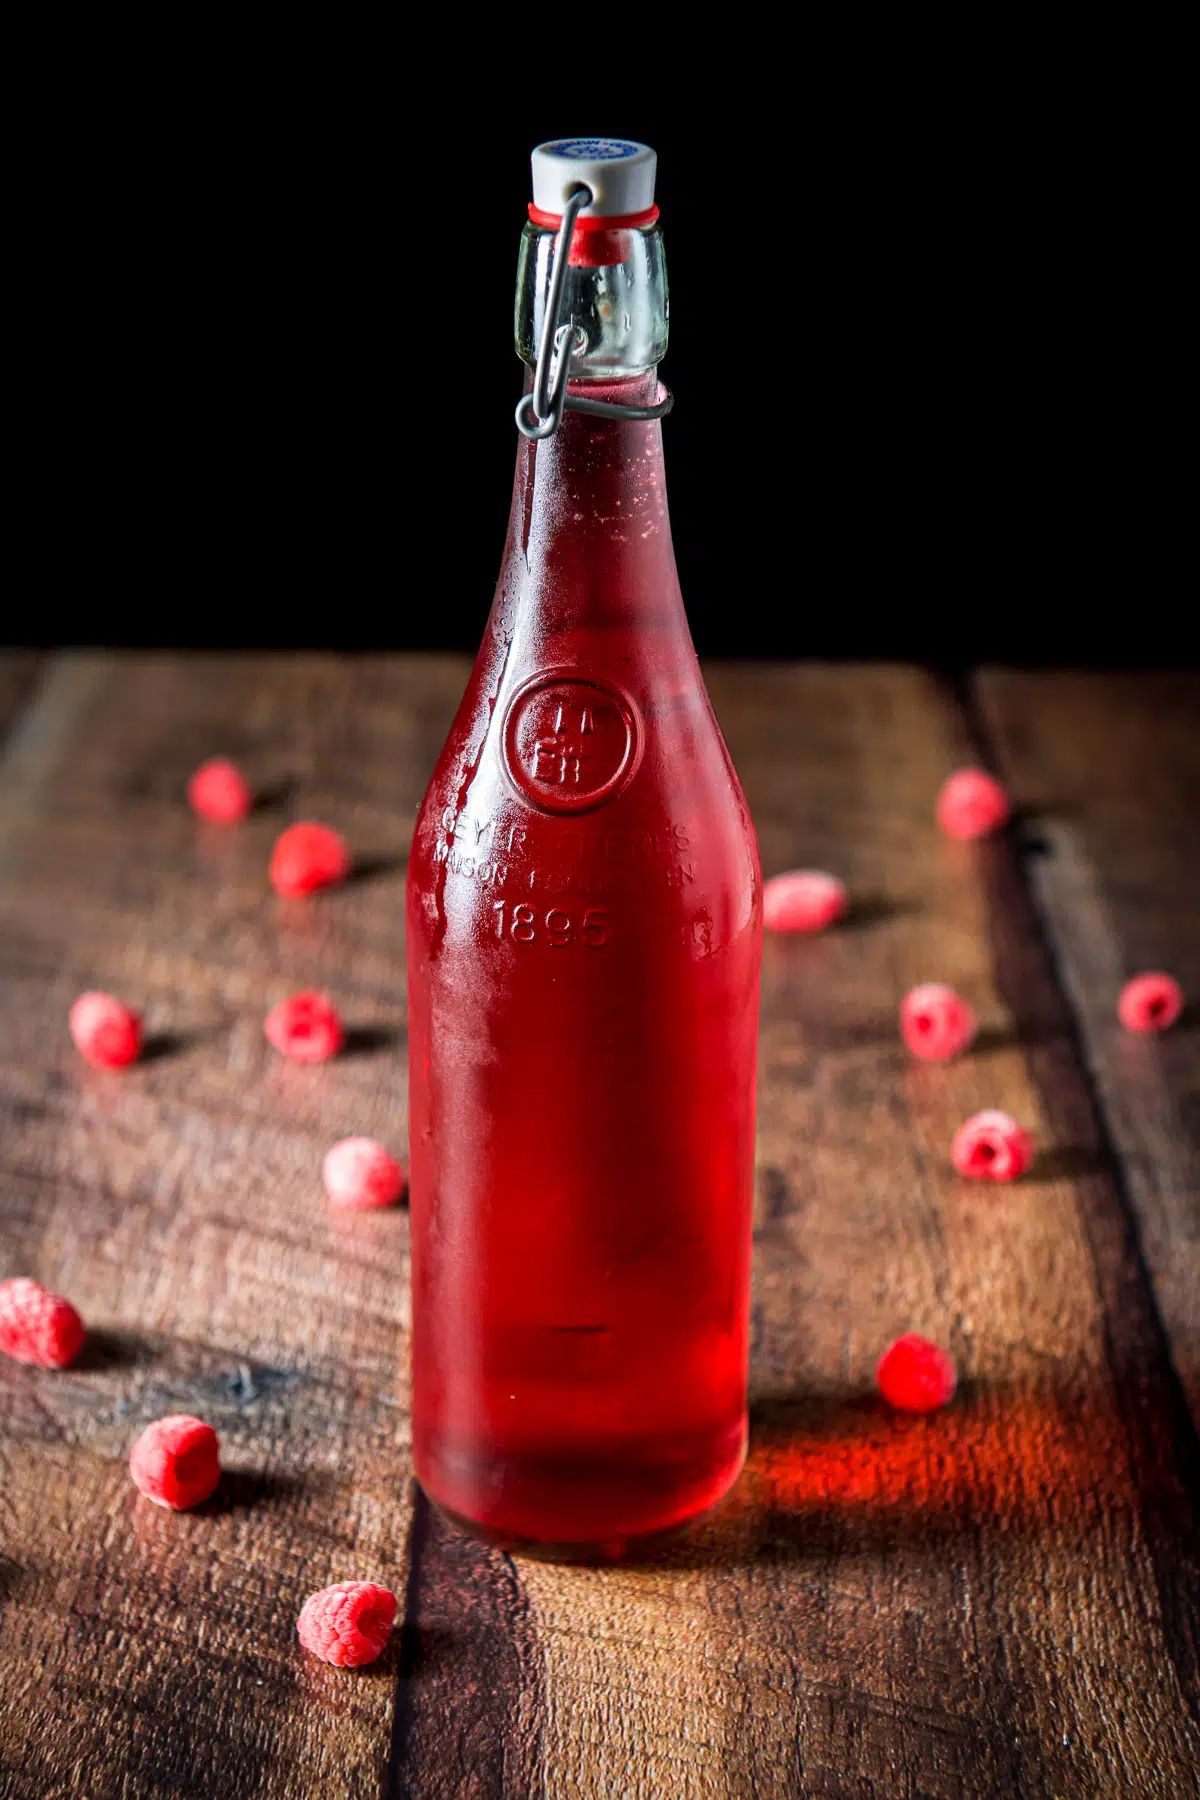 A capped bottle of red vodka with raspberries on the table